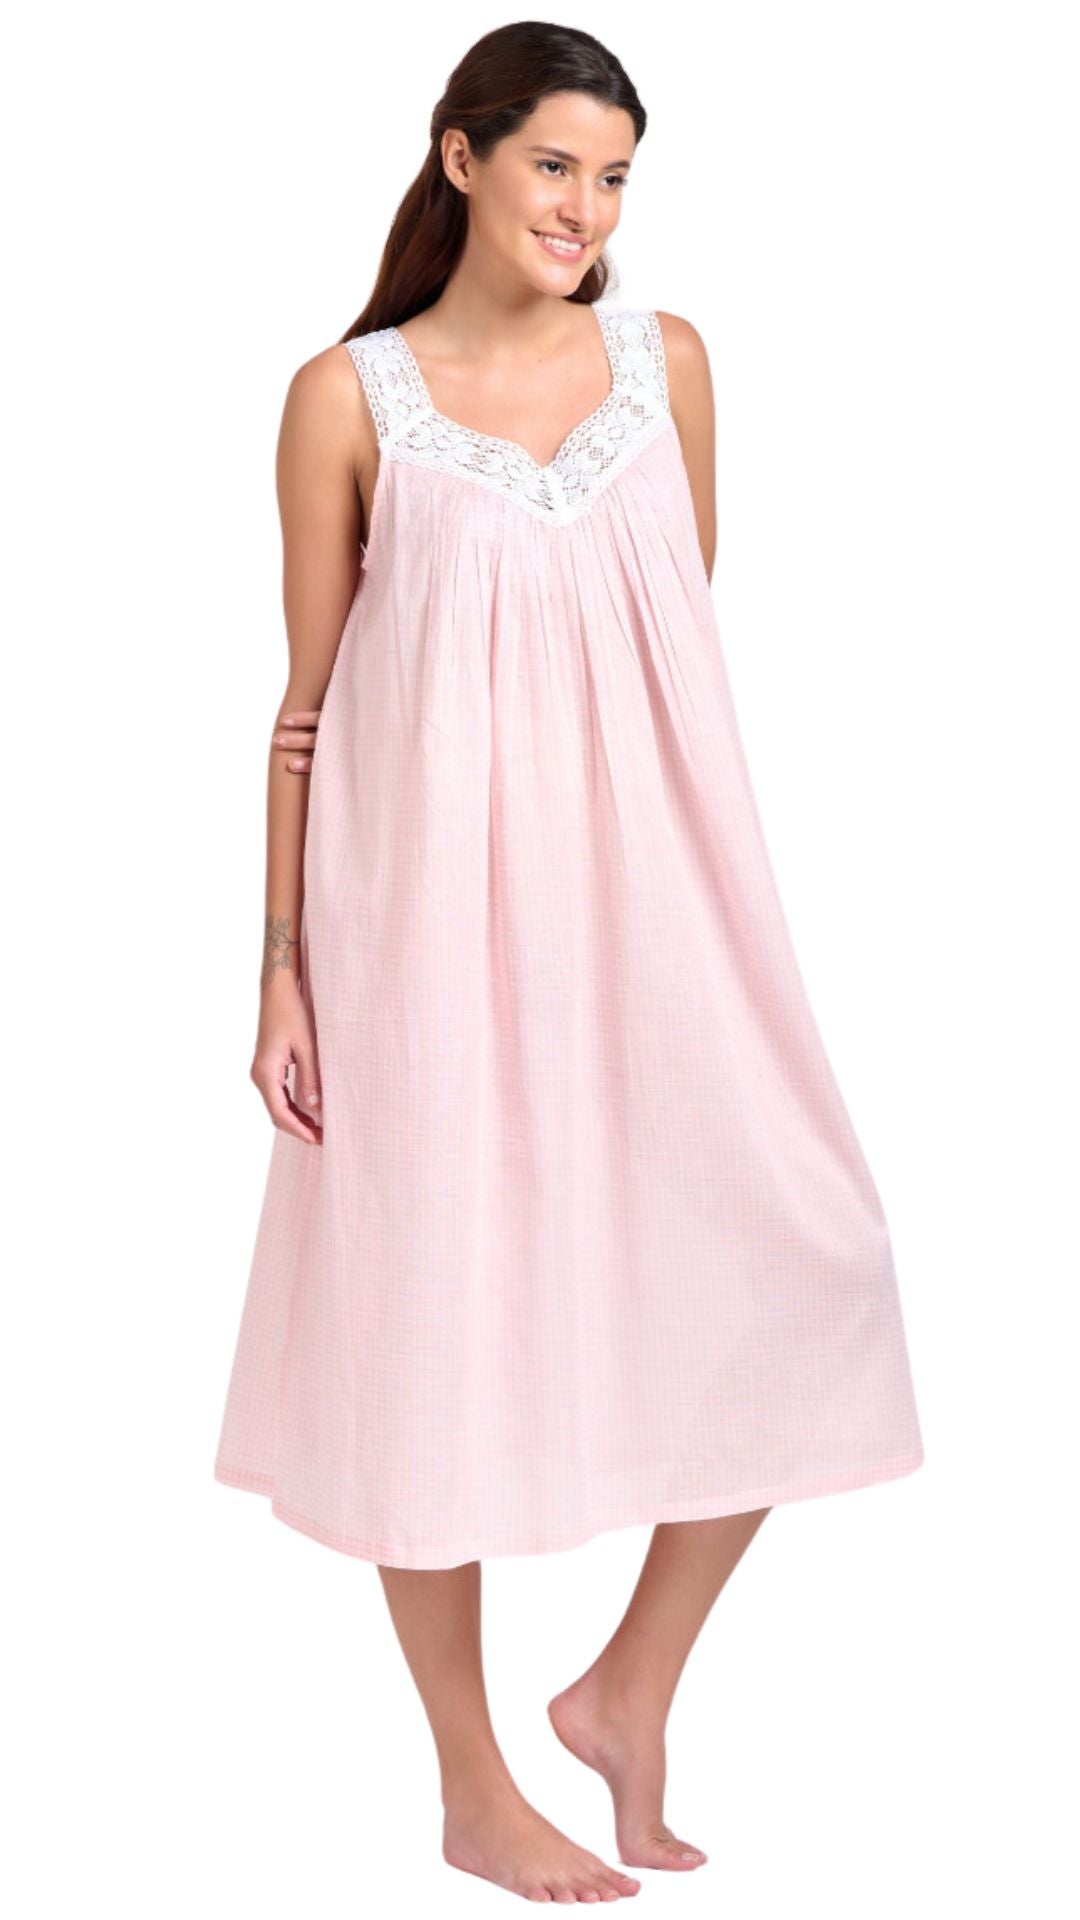 Pink Gingham cotton nightgown - nightie on model